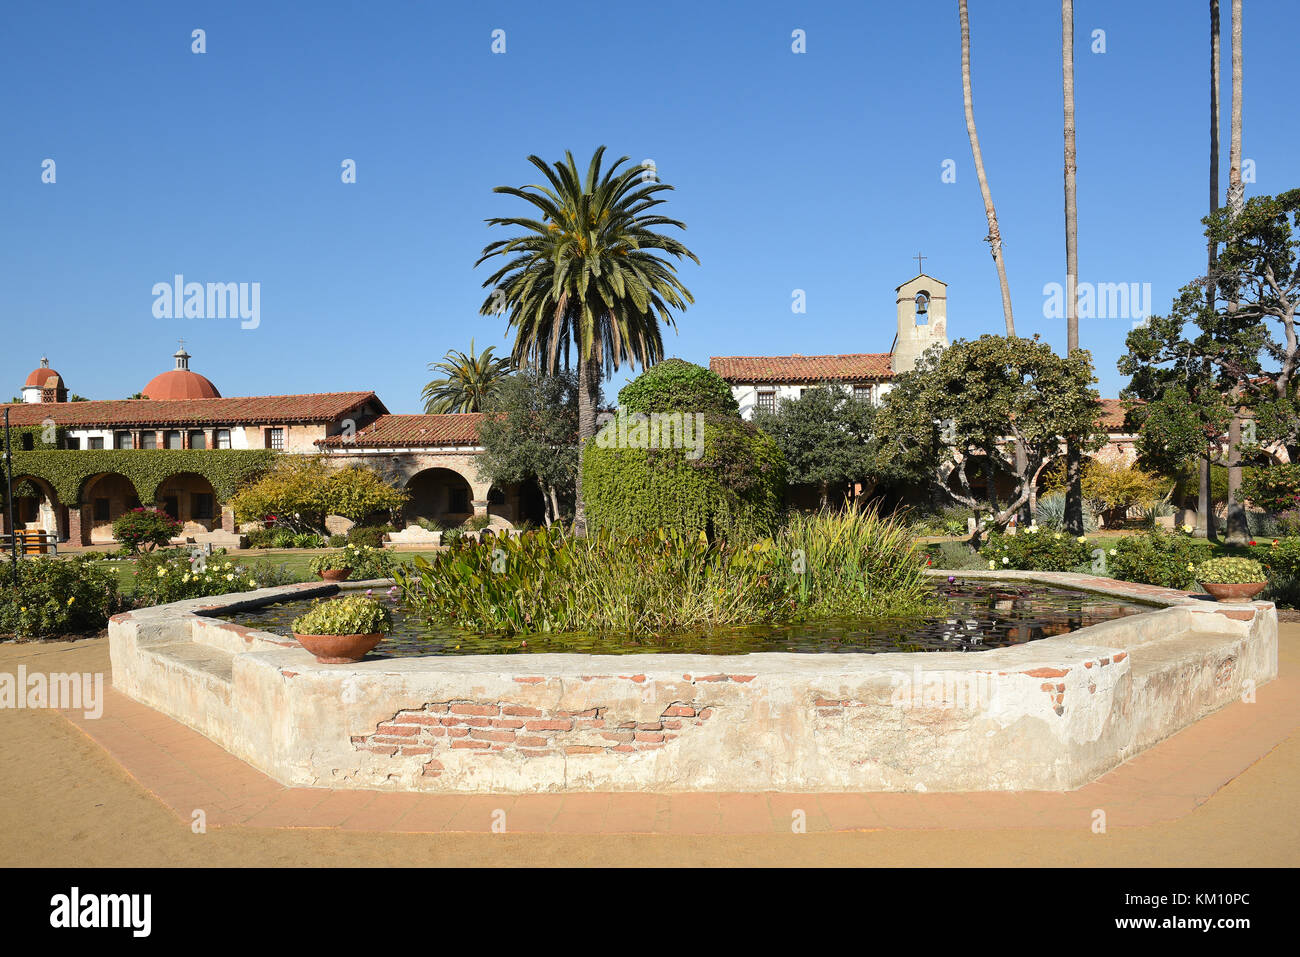 San Juan Capistrano, Ca - December 1, 2017: Pond in the Central Courtyard of the mission known as the Jewel of the missions. Stock Photo